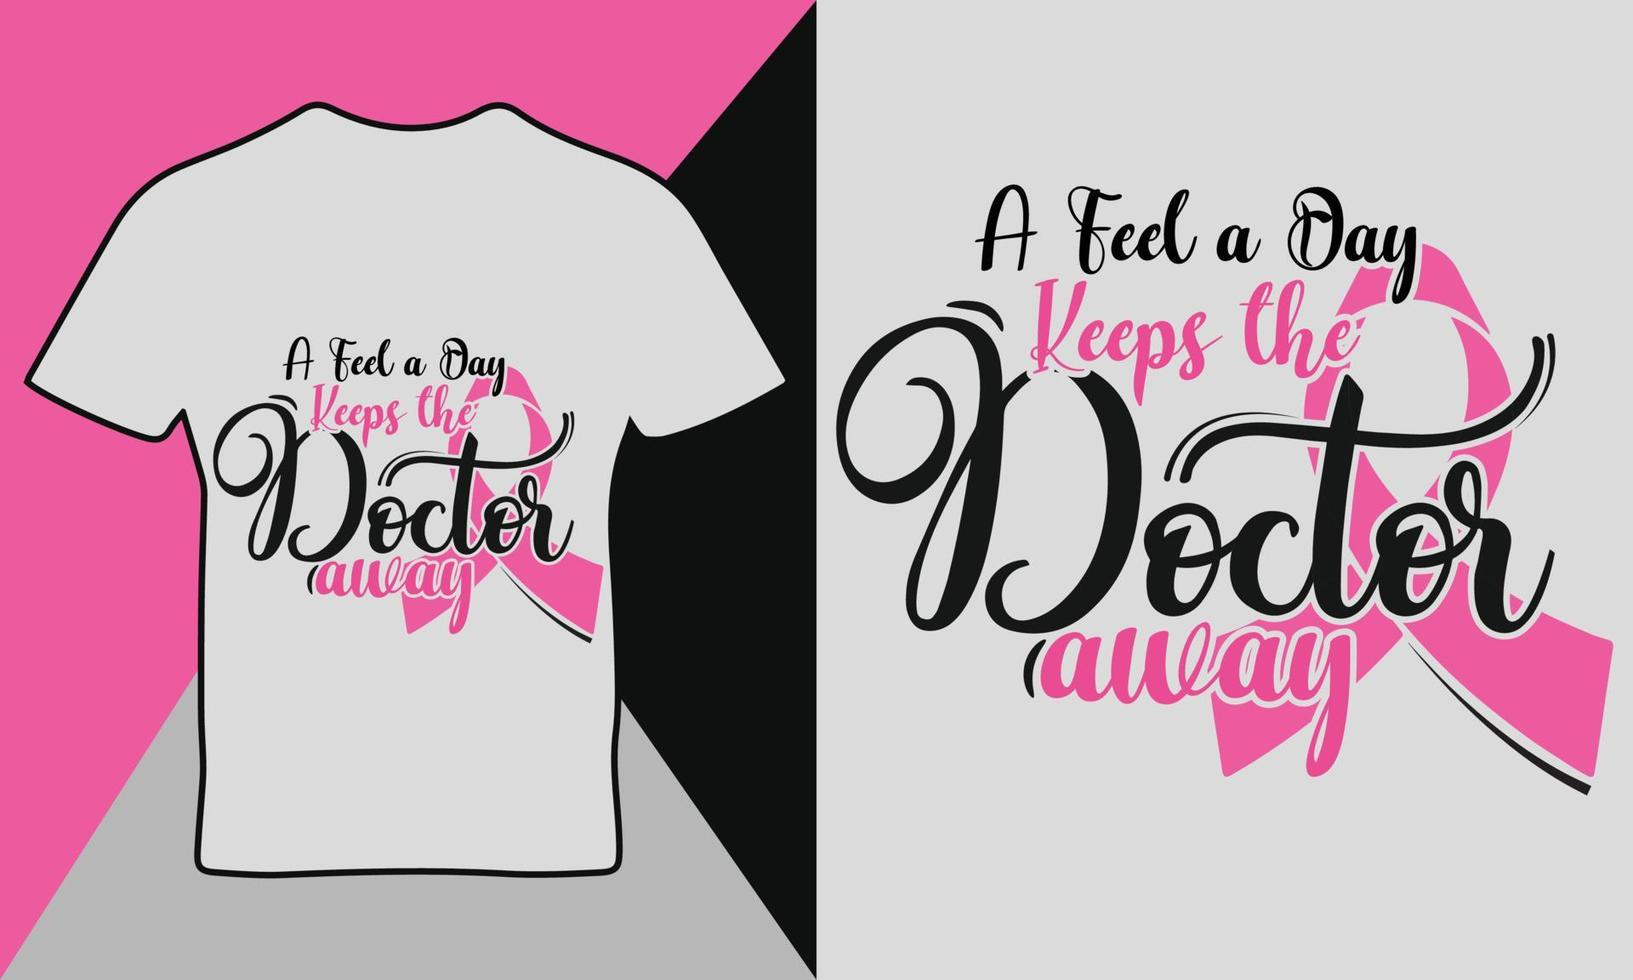 Breast cancer awareness quote typography t-shirt design template vector